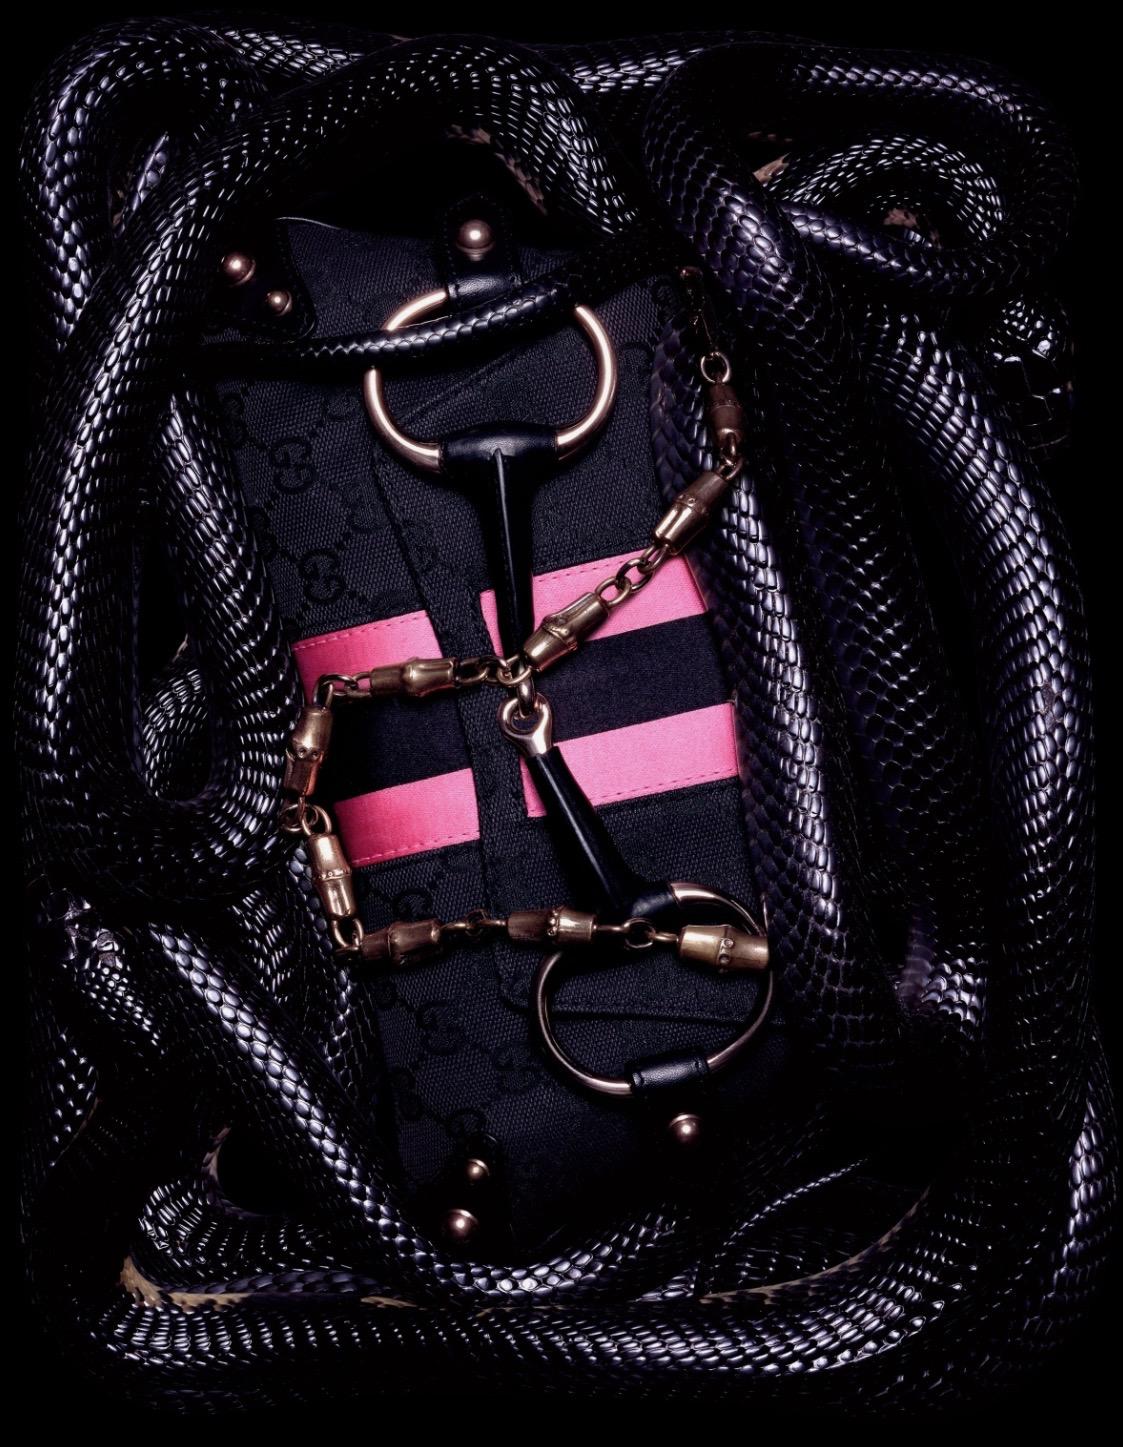 TheRealList presents: Designed by Tom Ford during his tenure at the house of Gucci, this bag represents Tom's interpretation of many of Gucci's classic elements ('GG' canvas, horse bits, etc.). Featured in the season's ad campaign, shot by Guido